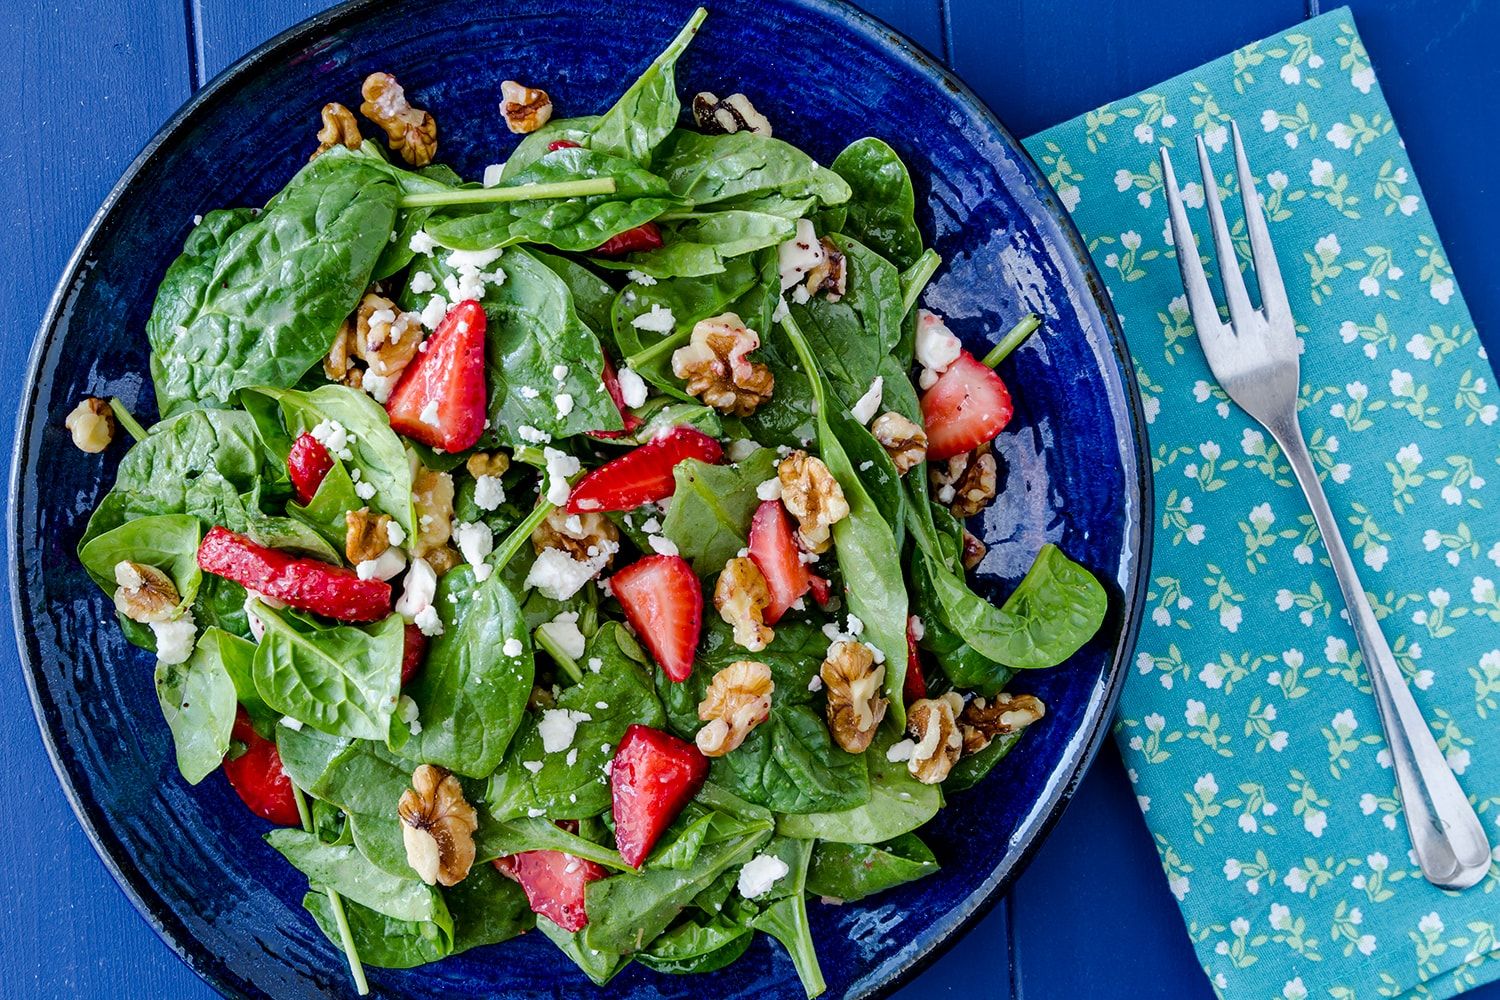 Spinach Strawberry Salad with walnuts and feta cheese and a homemade poppy seed dressing.